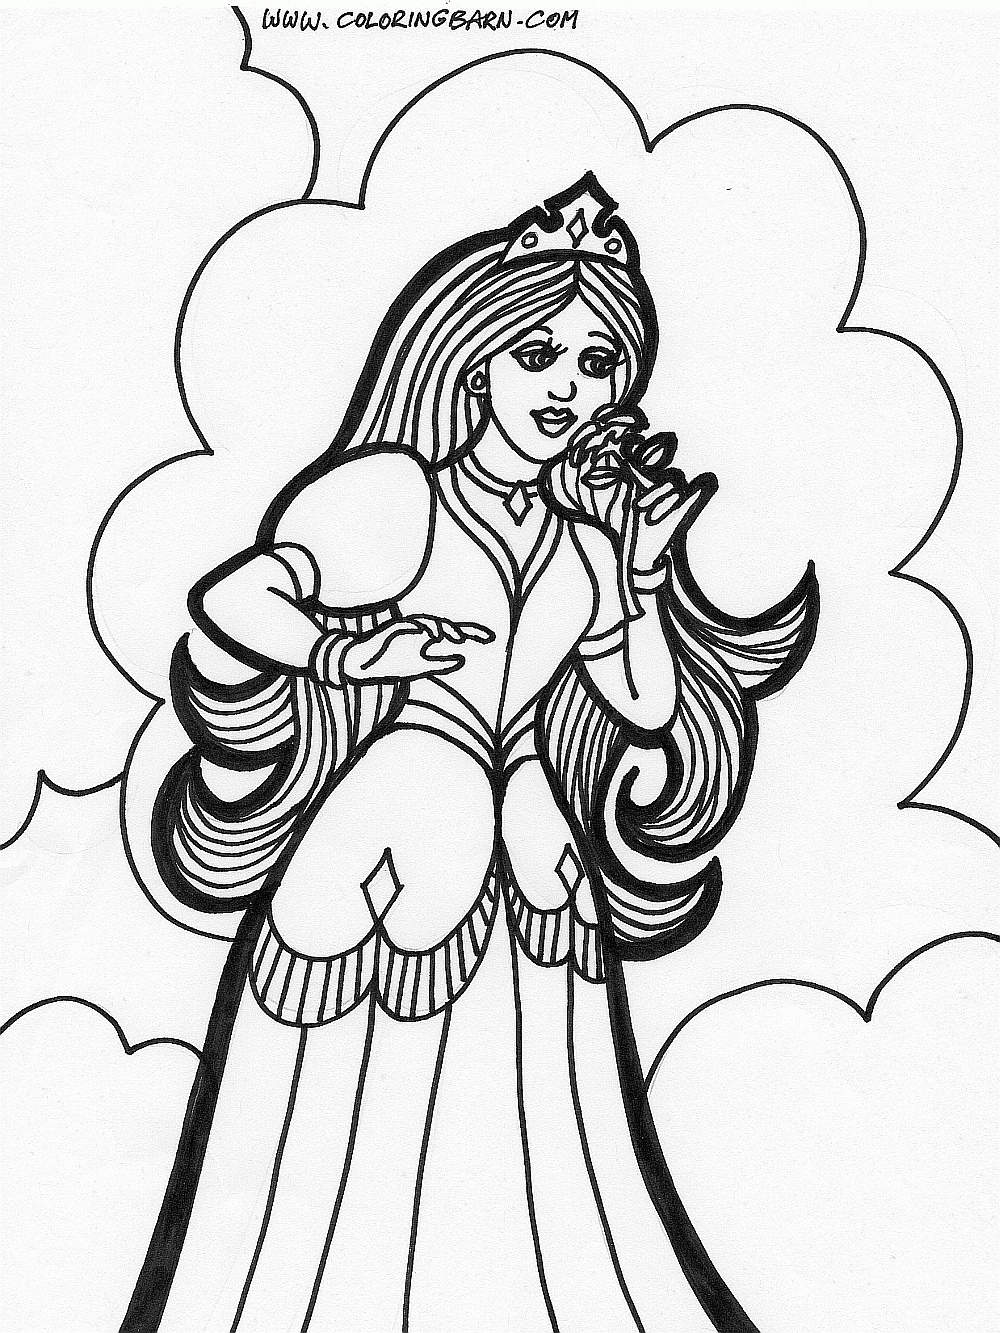 Disney Princess Coloring Pages Free Printable Coloring Pages